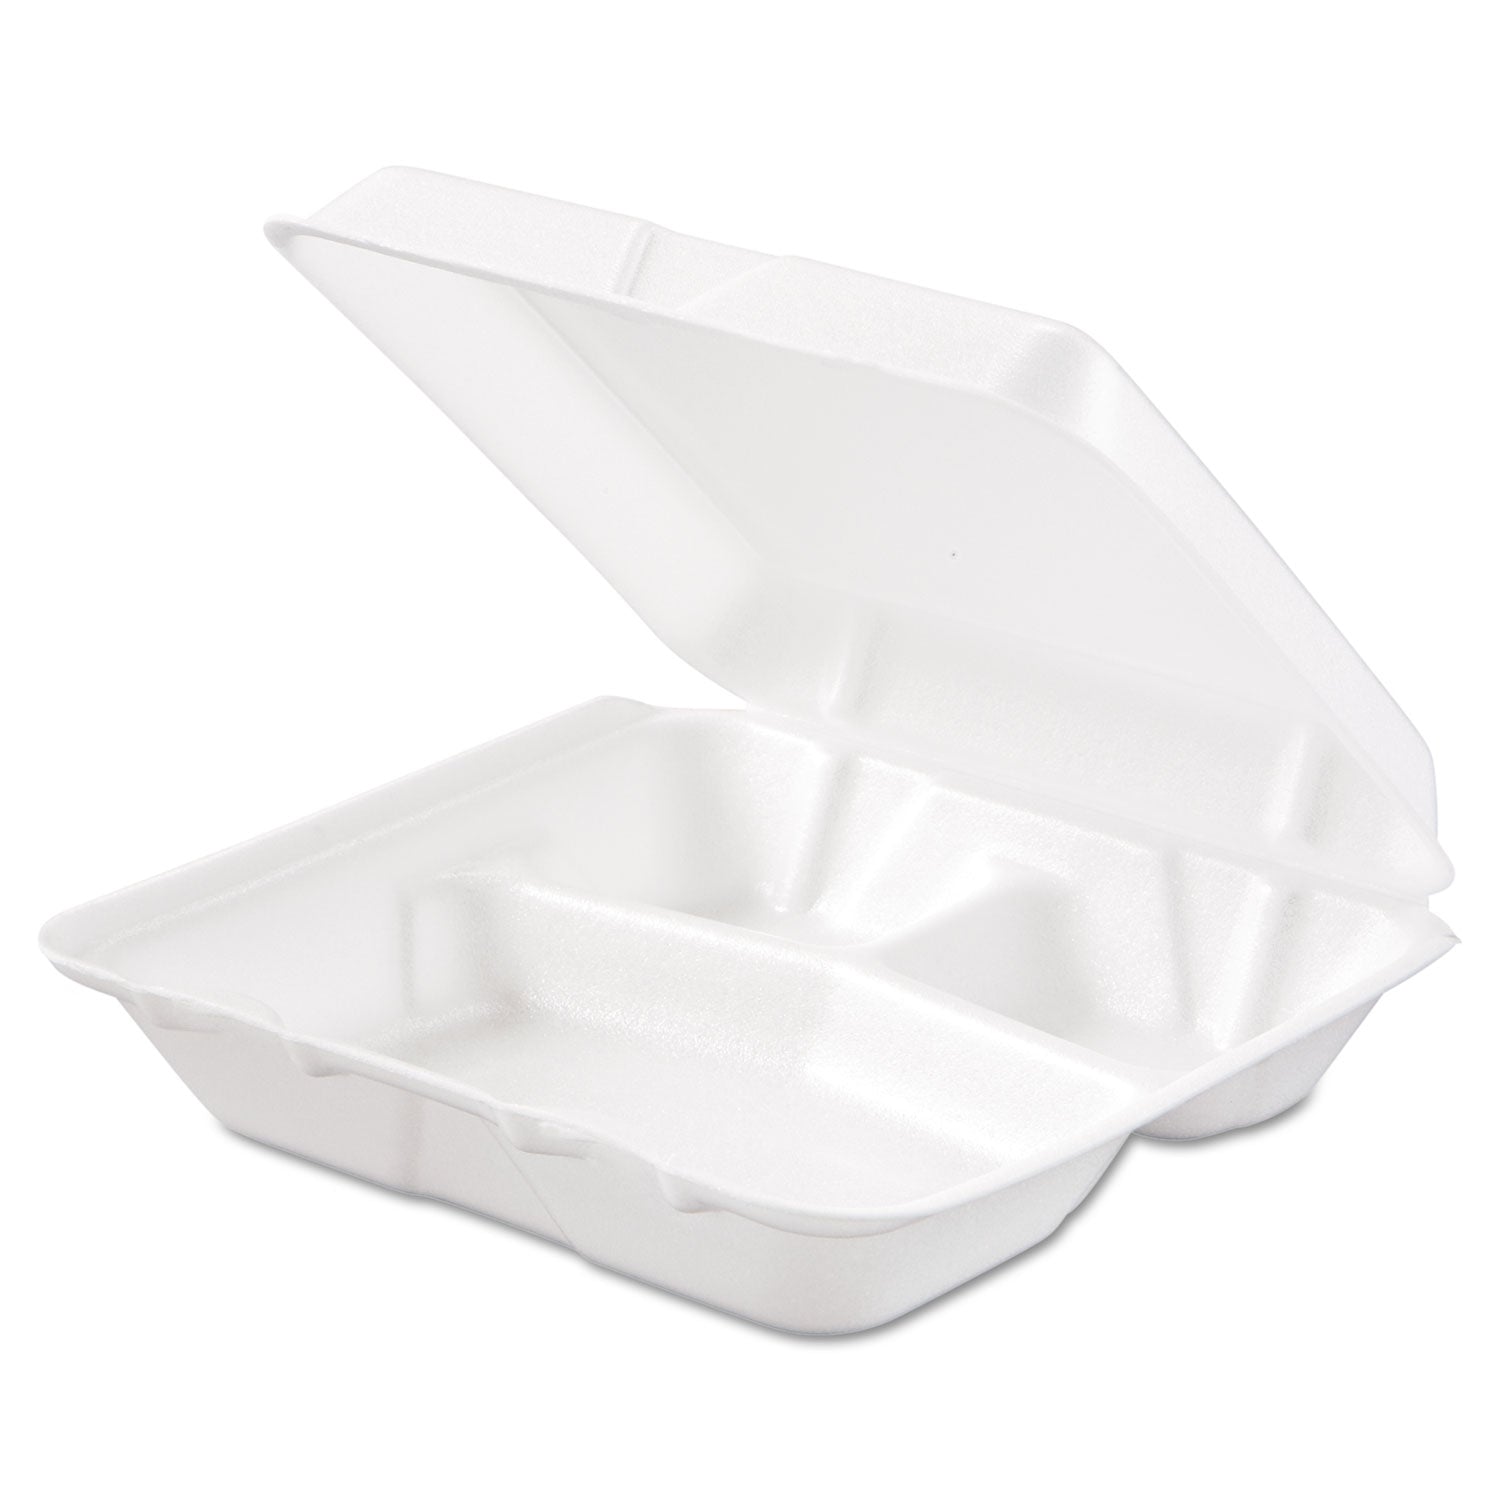 Foam Hinged Lid Containers, 3-Compartment, 7.5 x 8 x 2.3, White, 200/Carton - 